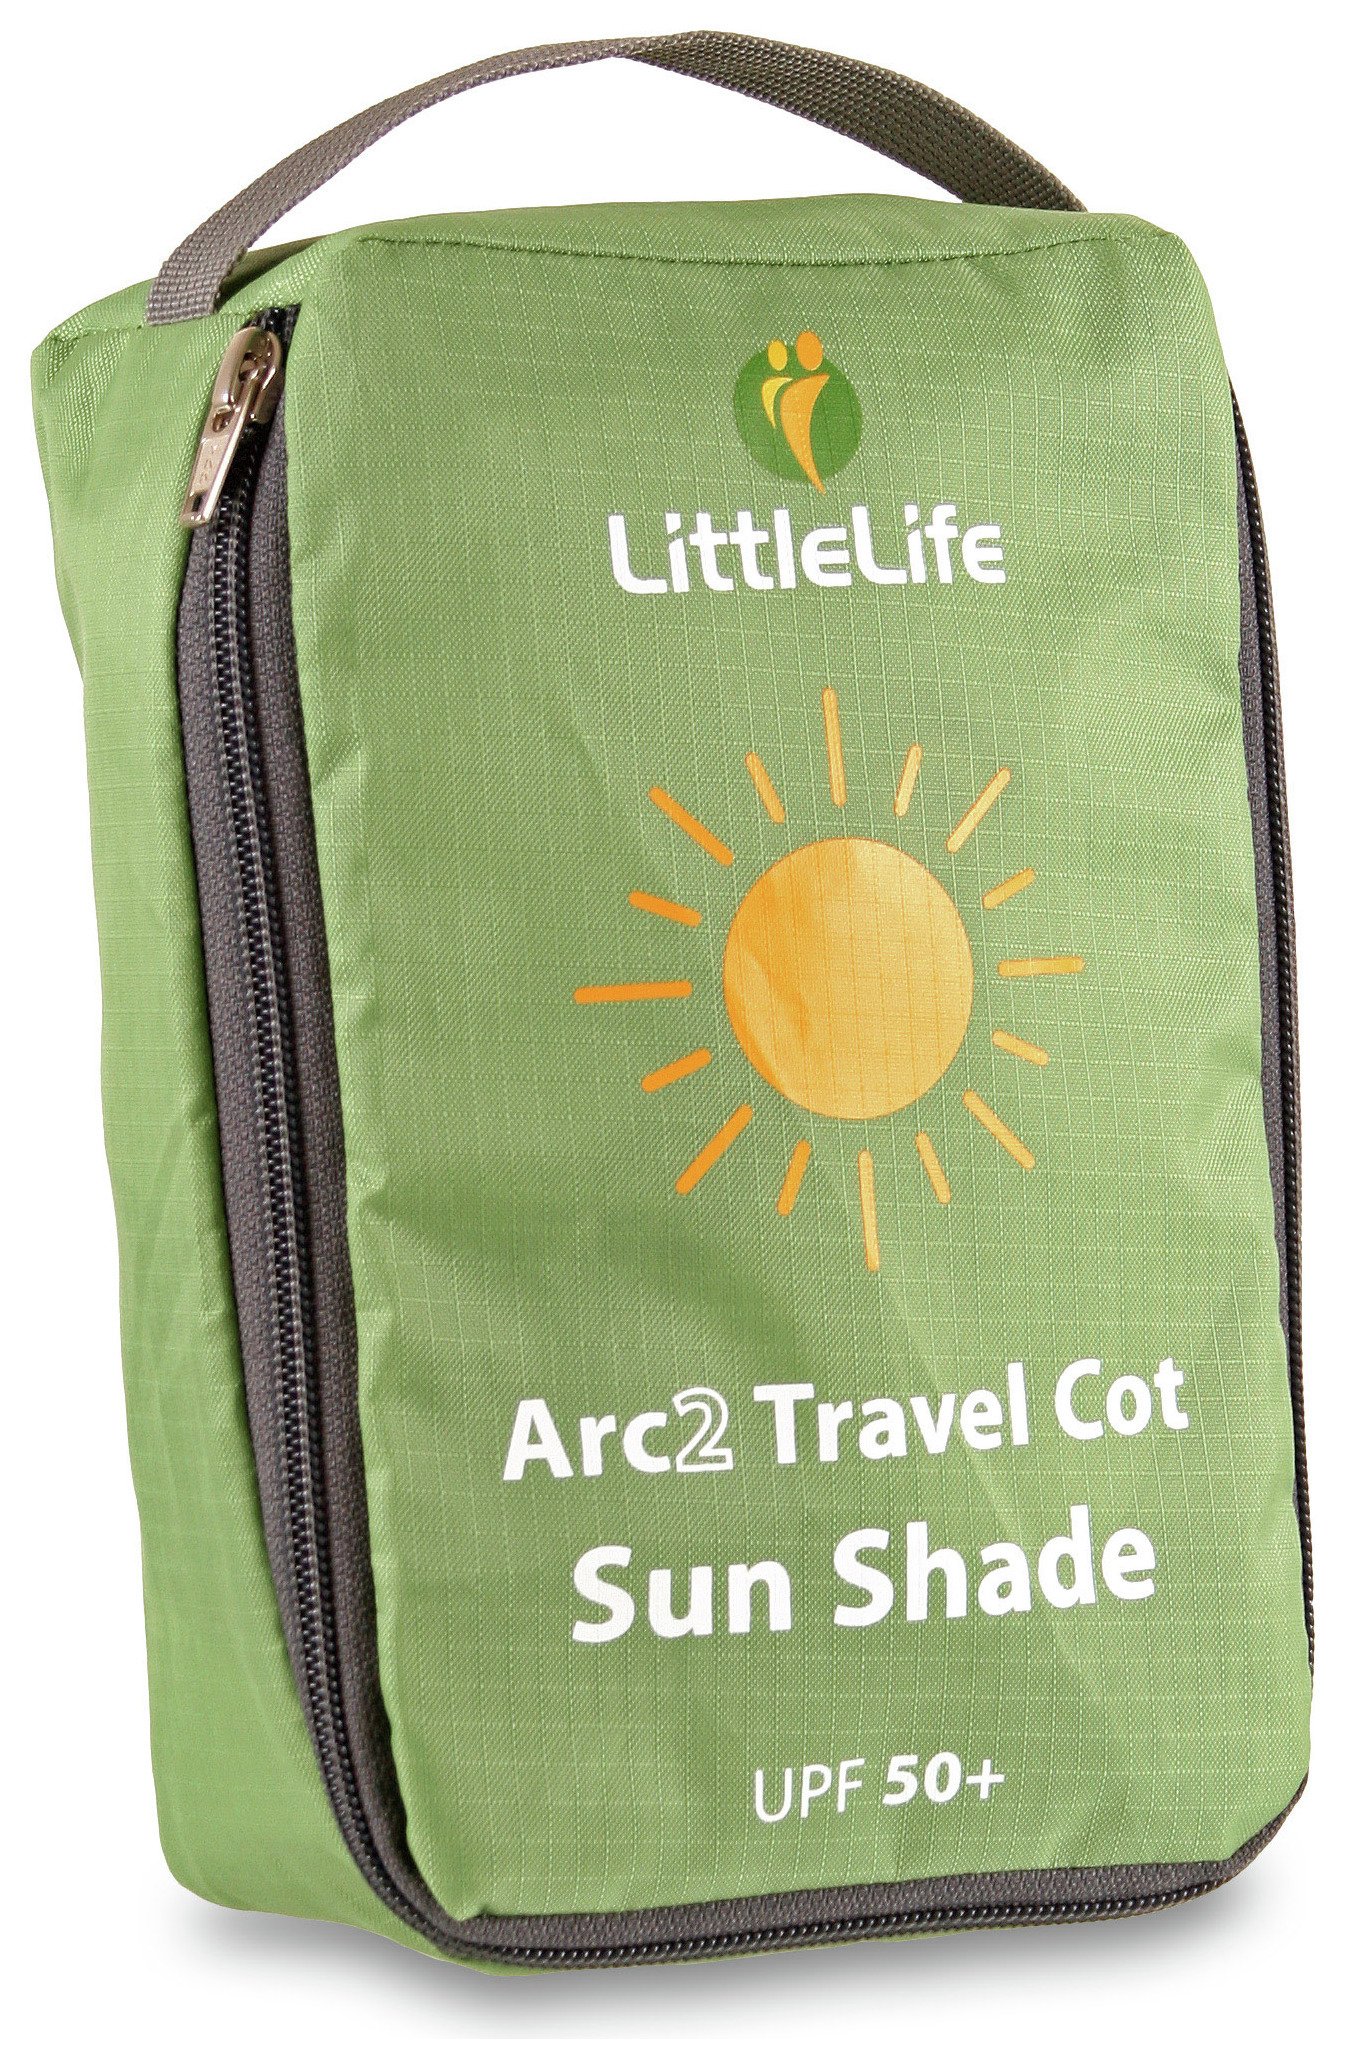 Littlelife Sunshade for Arc 2 Travel Cot Review